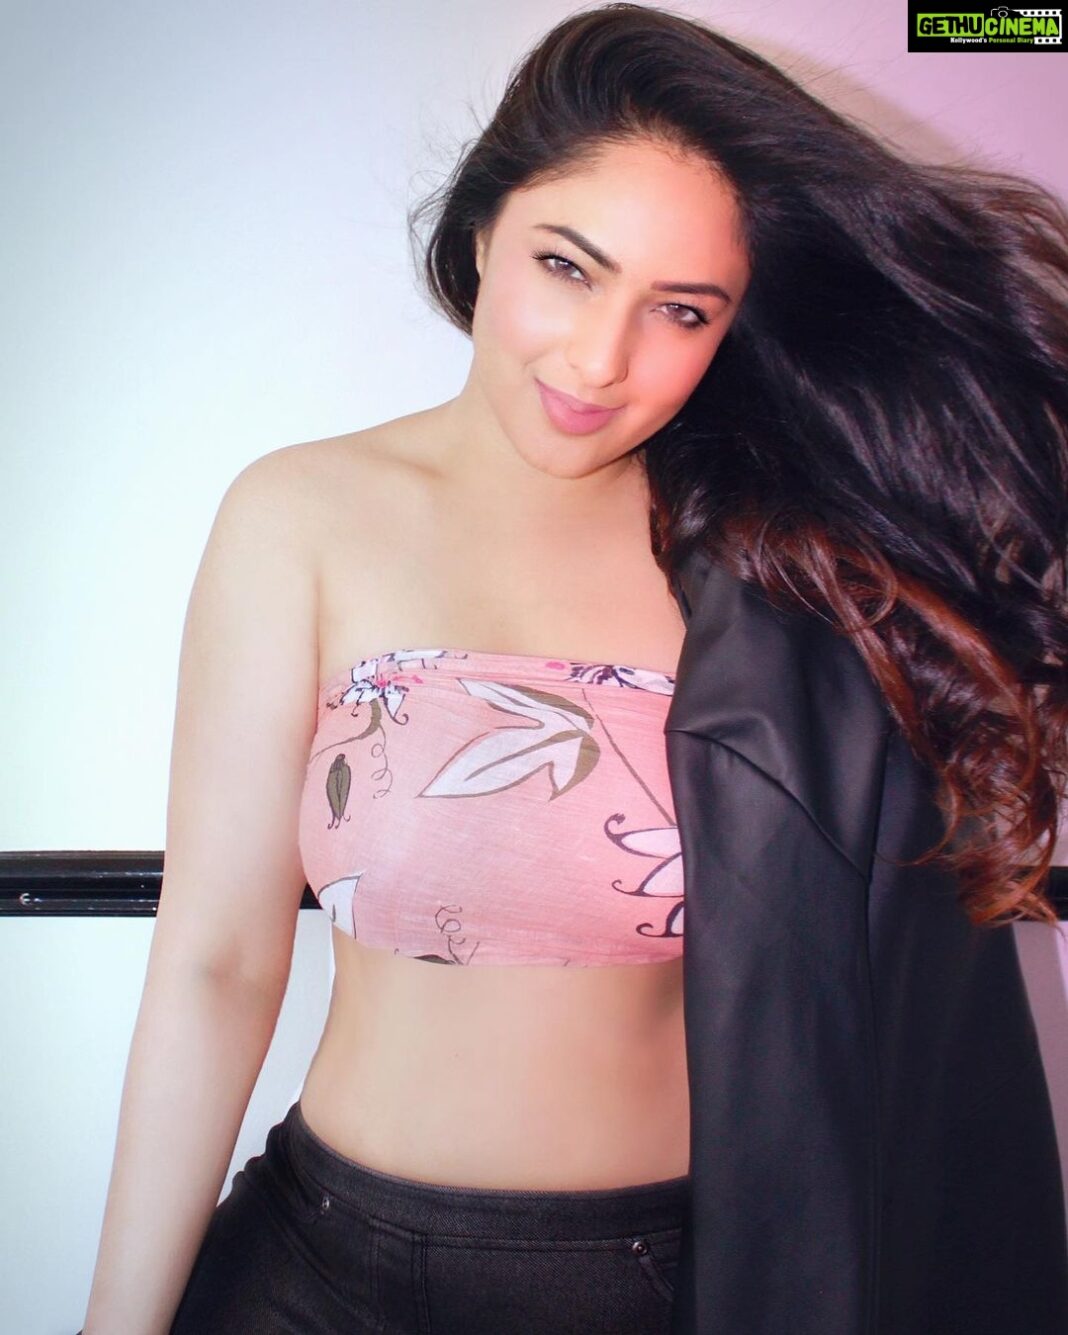 Nikesha Patel Instagram - #actor #nikeshapatel #model #style #streetstyle #selfcare #spring #smile #loveyourself #love #london #wales #indian #indianactor #asianactor #ukagency #bollywood #wales #cardiff #makeup #memes #caloriescount #gym #fitness #workout #keto